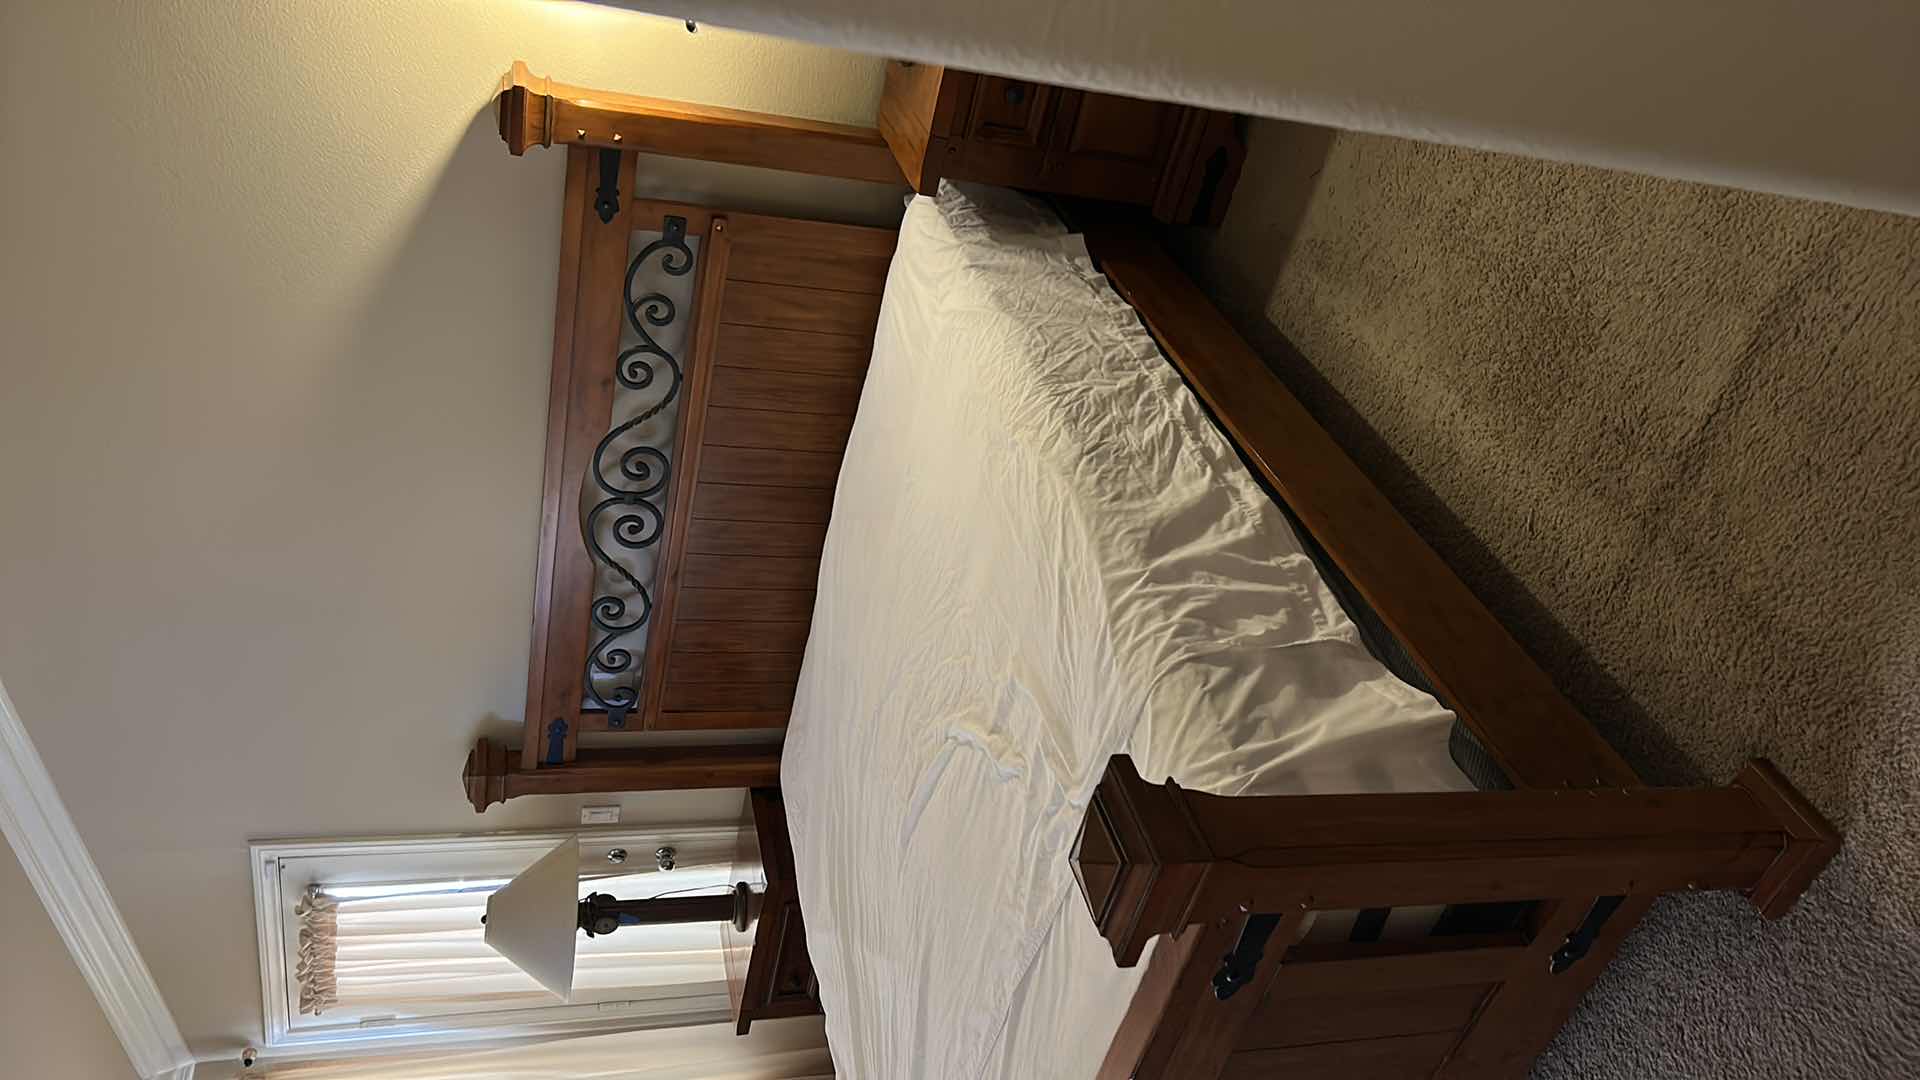 Photo 12 of HOME FURNITURE - WOOD WITH METAL ACCENTS - KING BEDFRAME HEADBOARD AND FOOTBOARD 82. 5” x 90” x H61” (MATTRESS AND OTHER PIECES SOLD SEPERATELY)